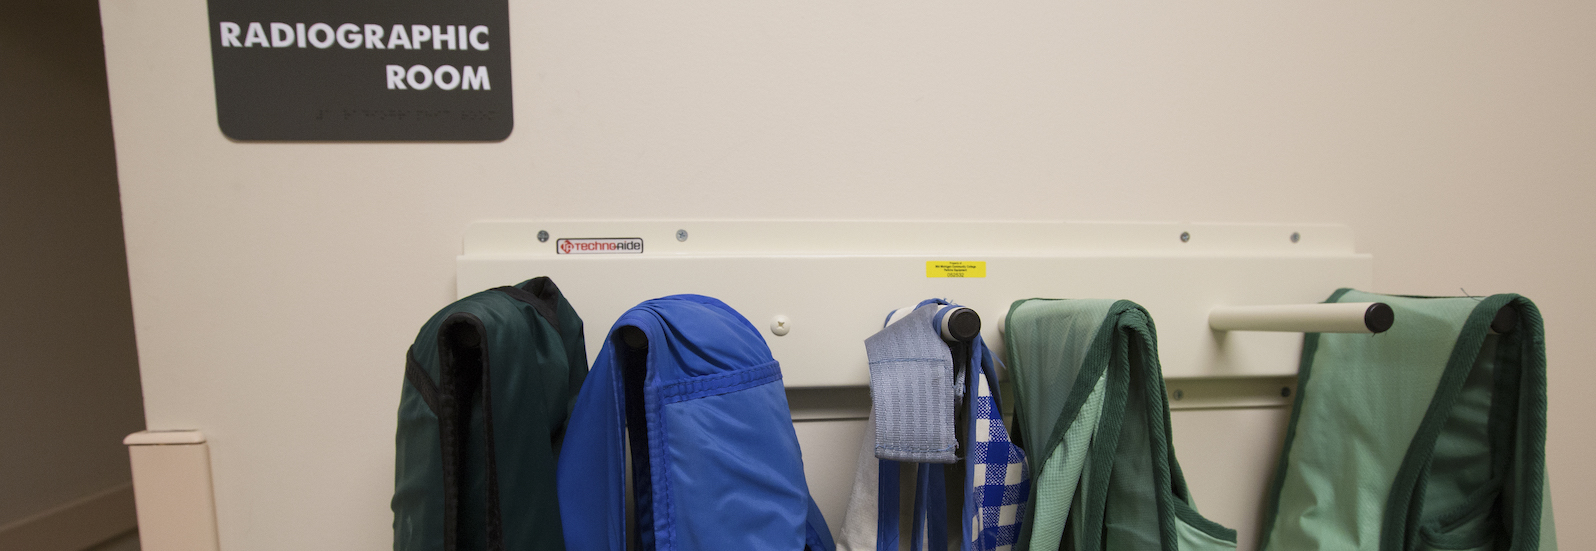 X-ray garments hang outside the radiographic room at the Center for Medical Imaging Studies on the Mid Michigan College Harrison campus on Friday, Jan. 18, 2019.